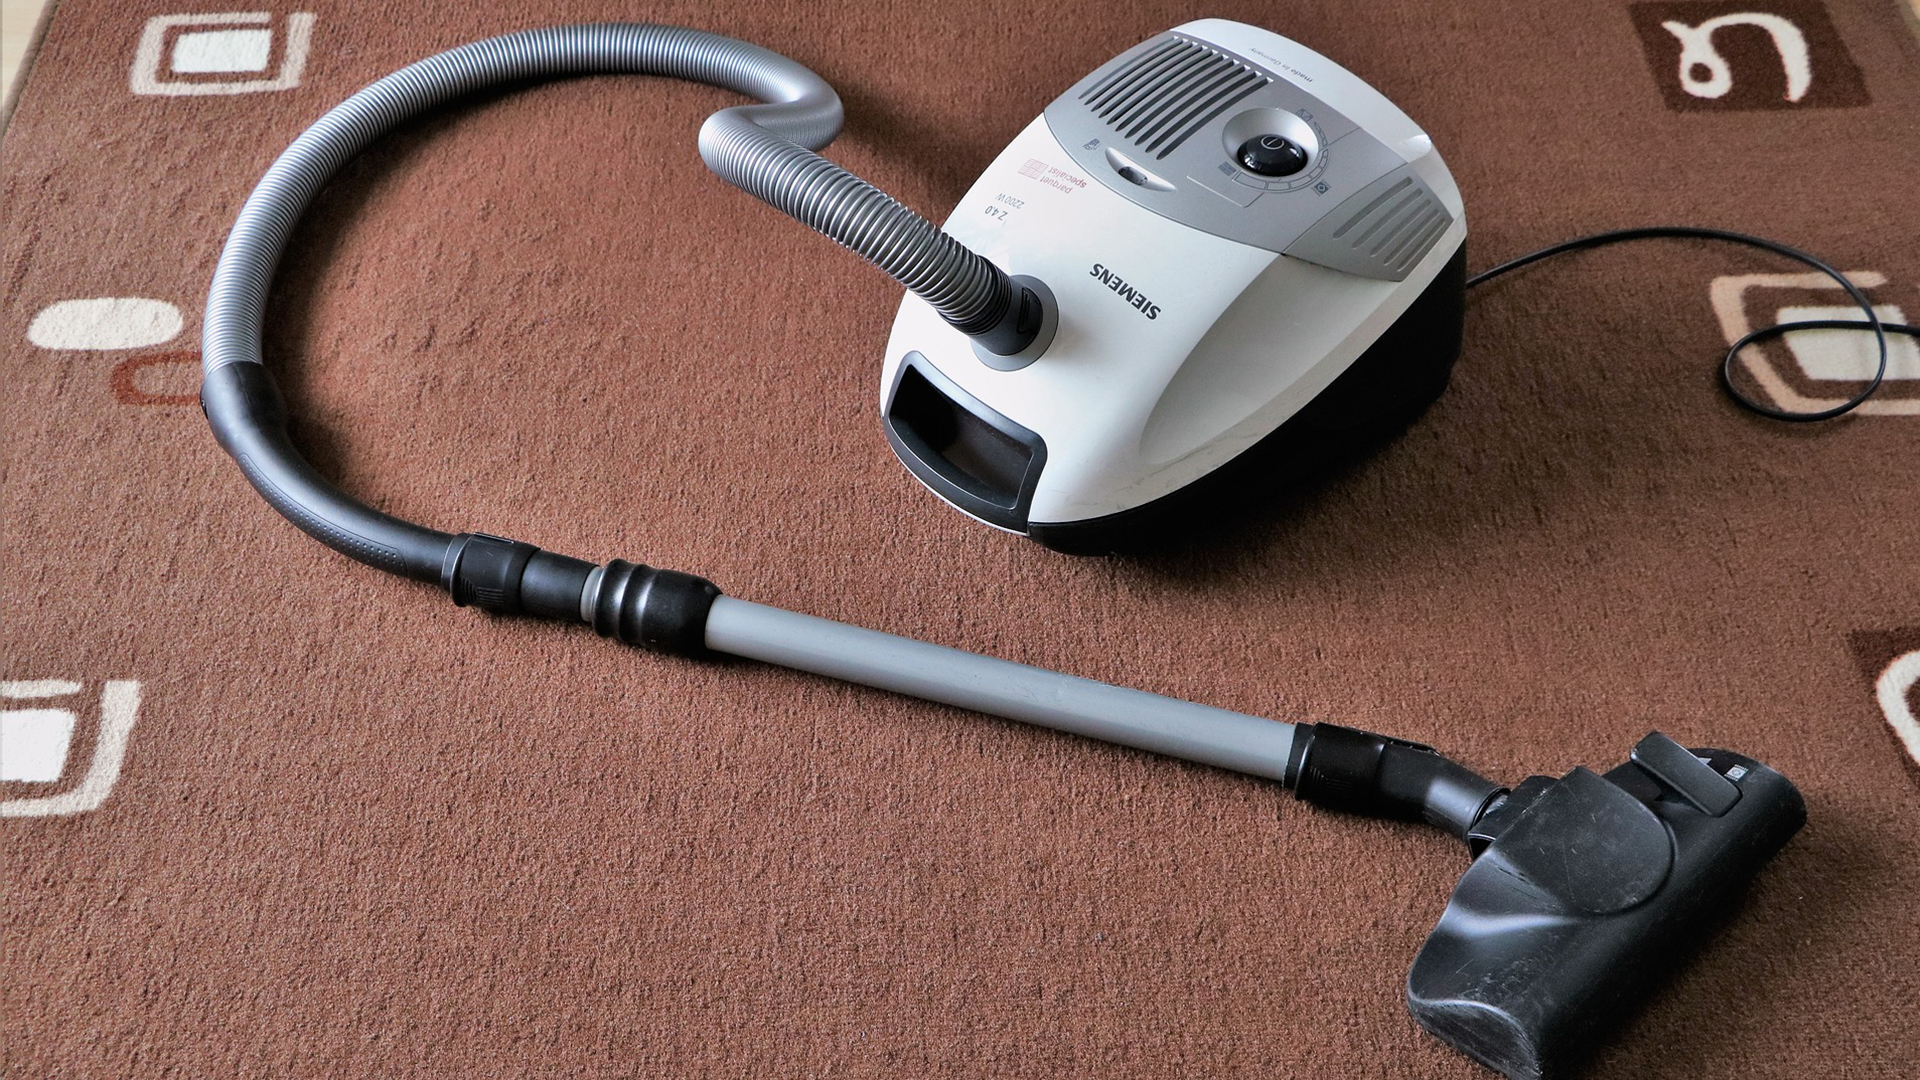 you can check out the list of best vacuum cleaner brands in the world